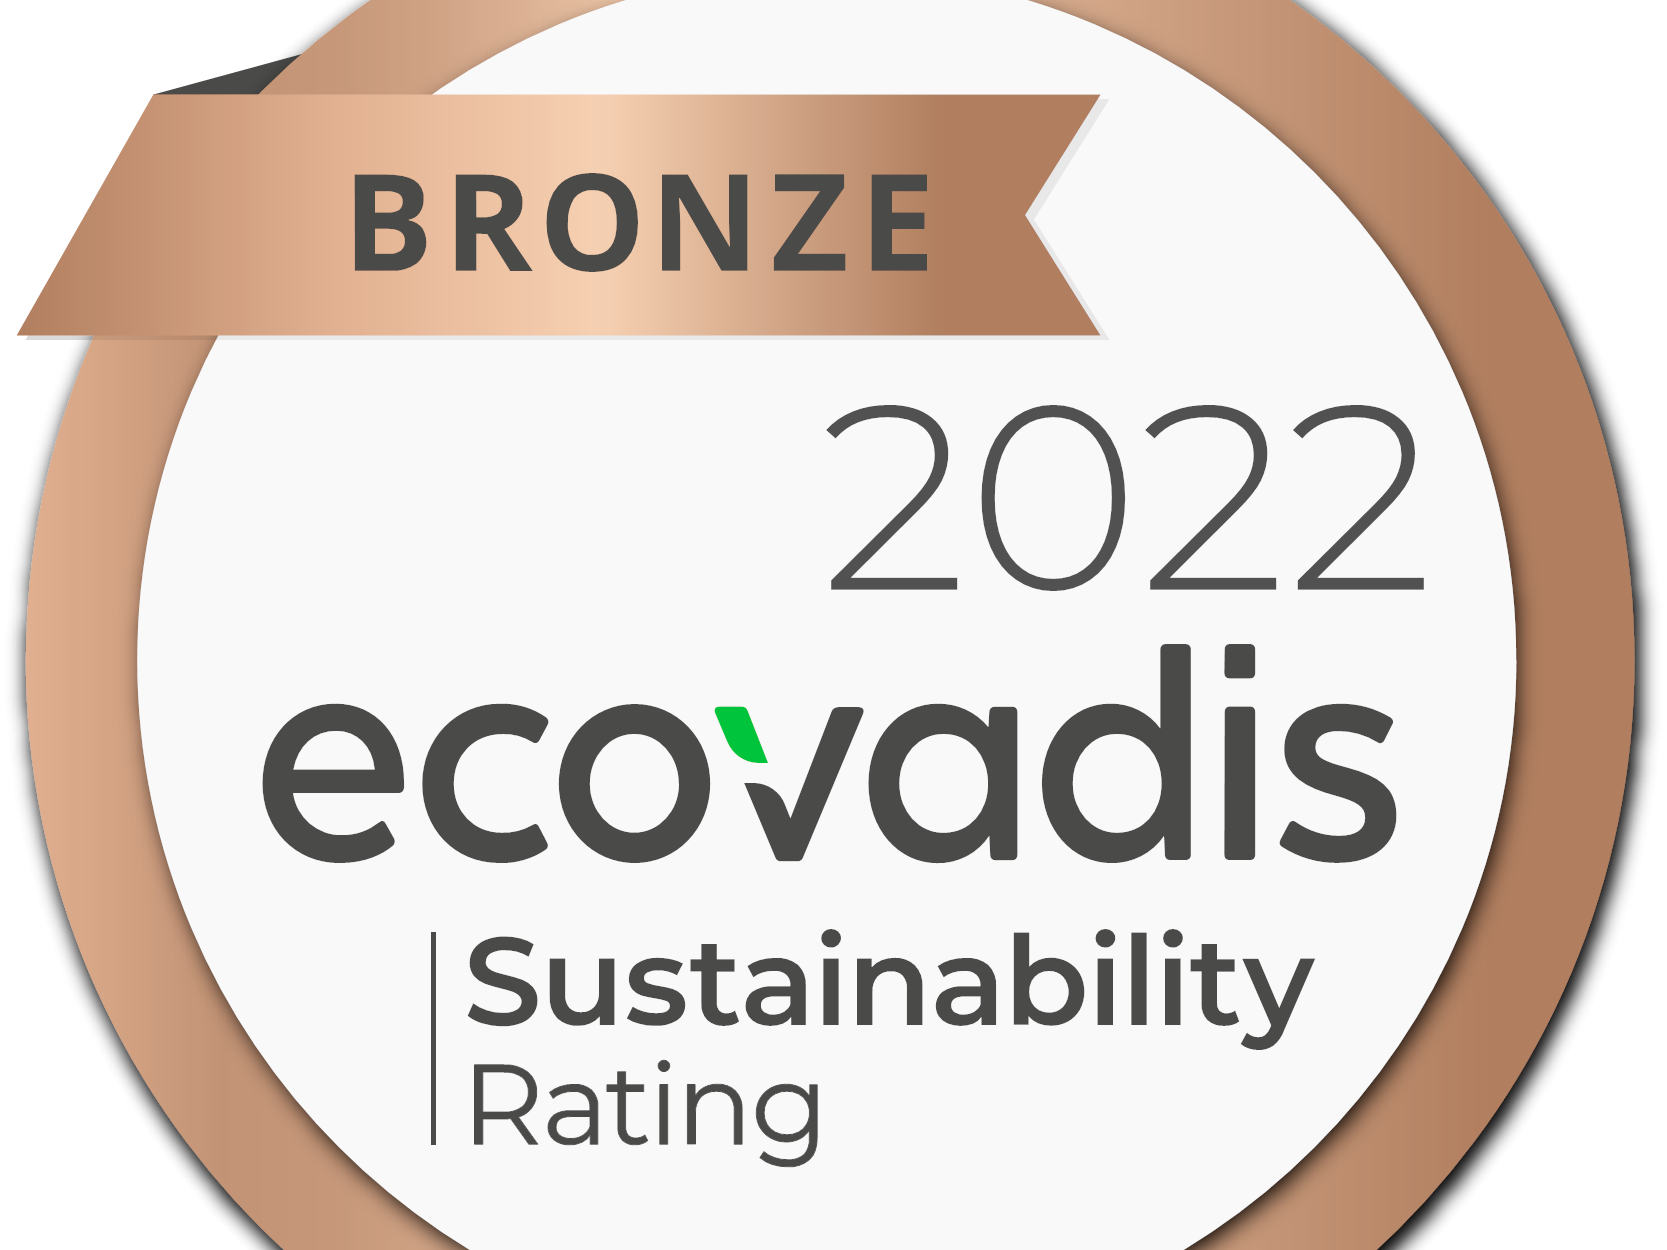 Ecovadis Medaille 2022